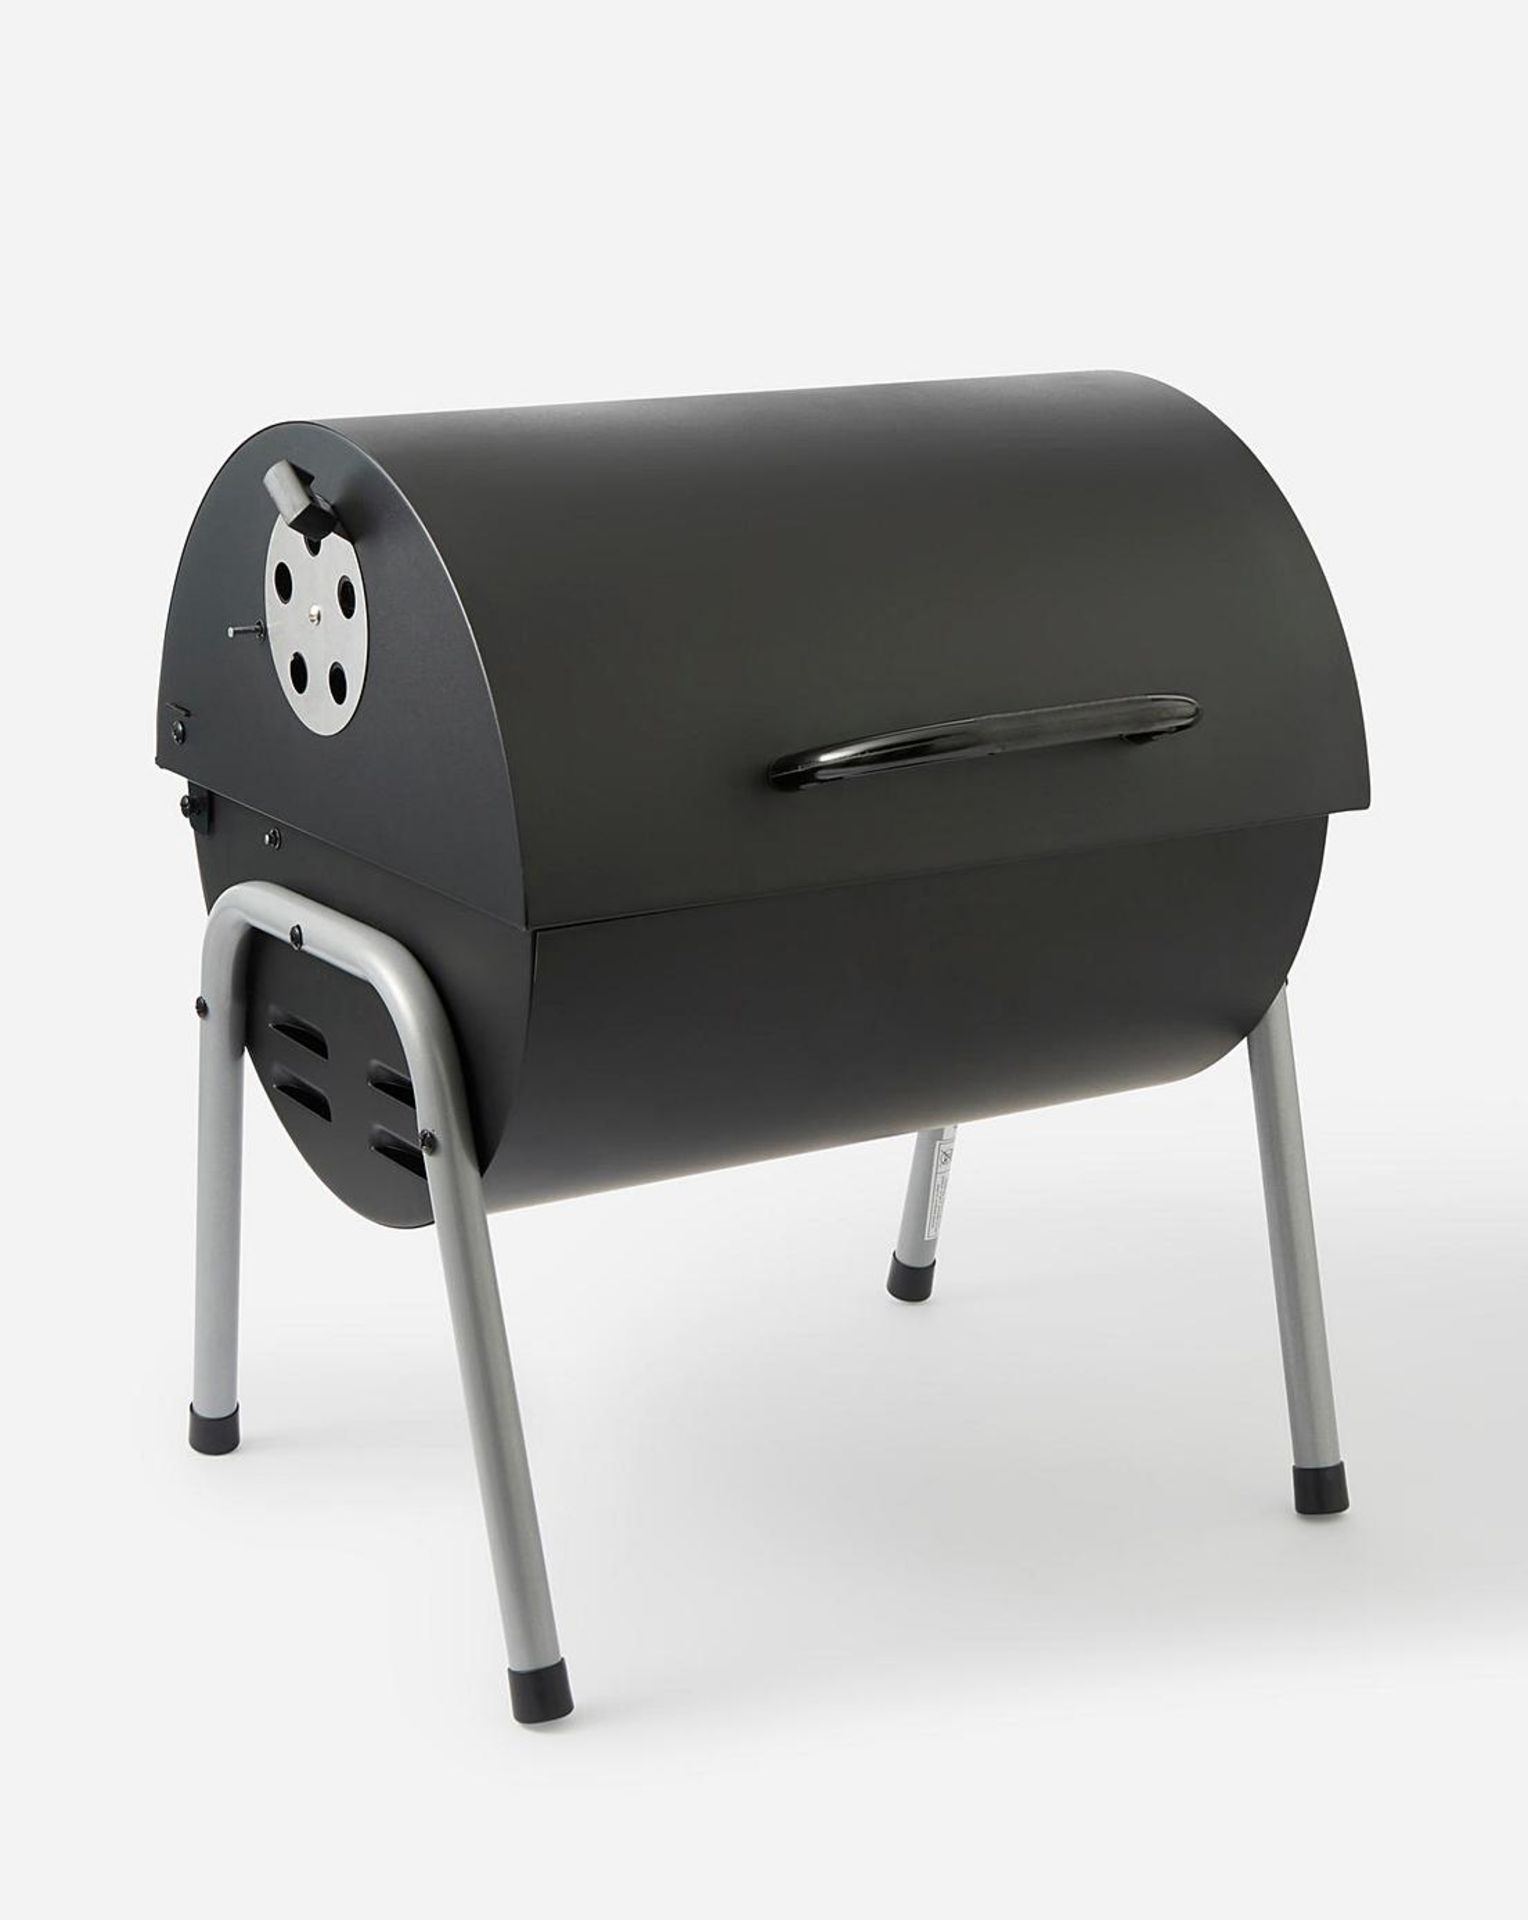 2x BRAND NEW Tabletop Oil Drum Barbeque Grill. RRP £59.99 EACH. Black steel firebowl with enamel - Bild 3 aus 4